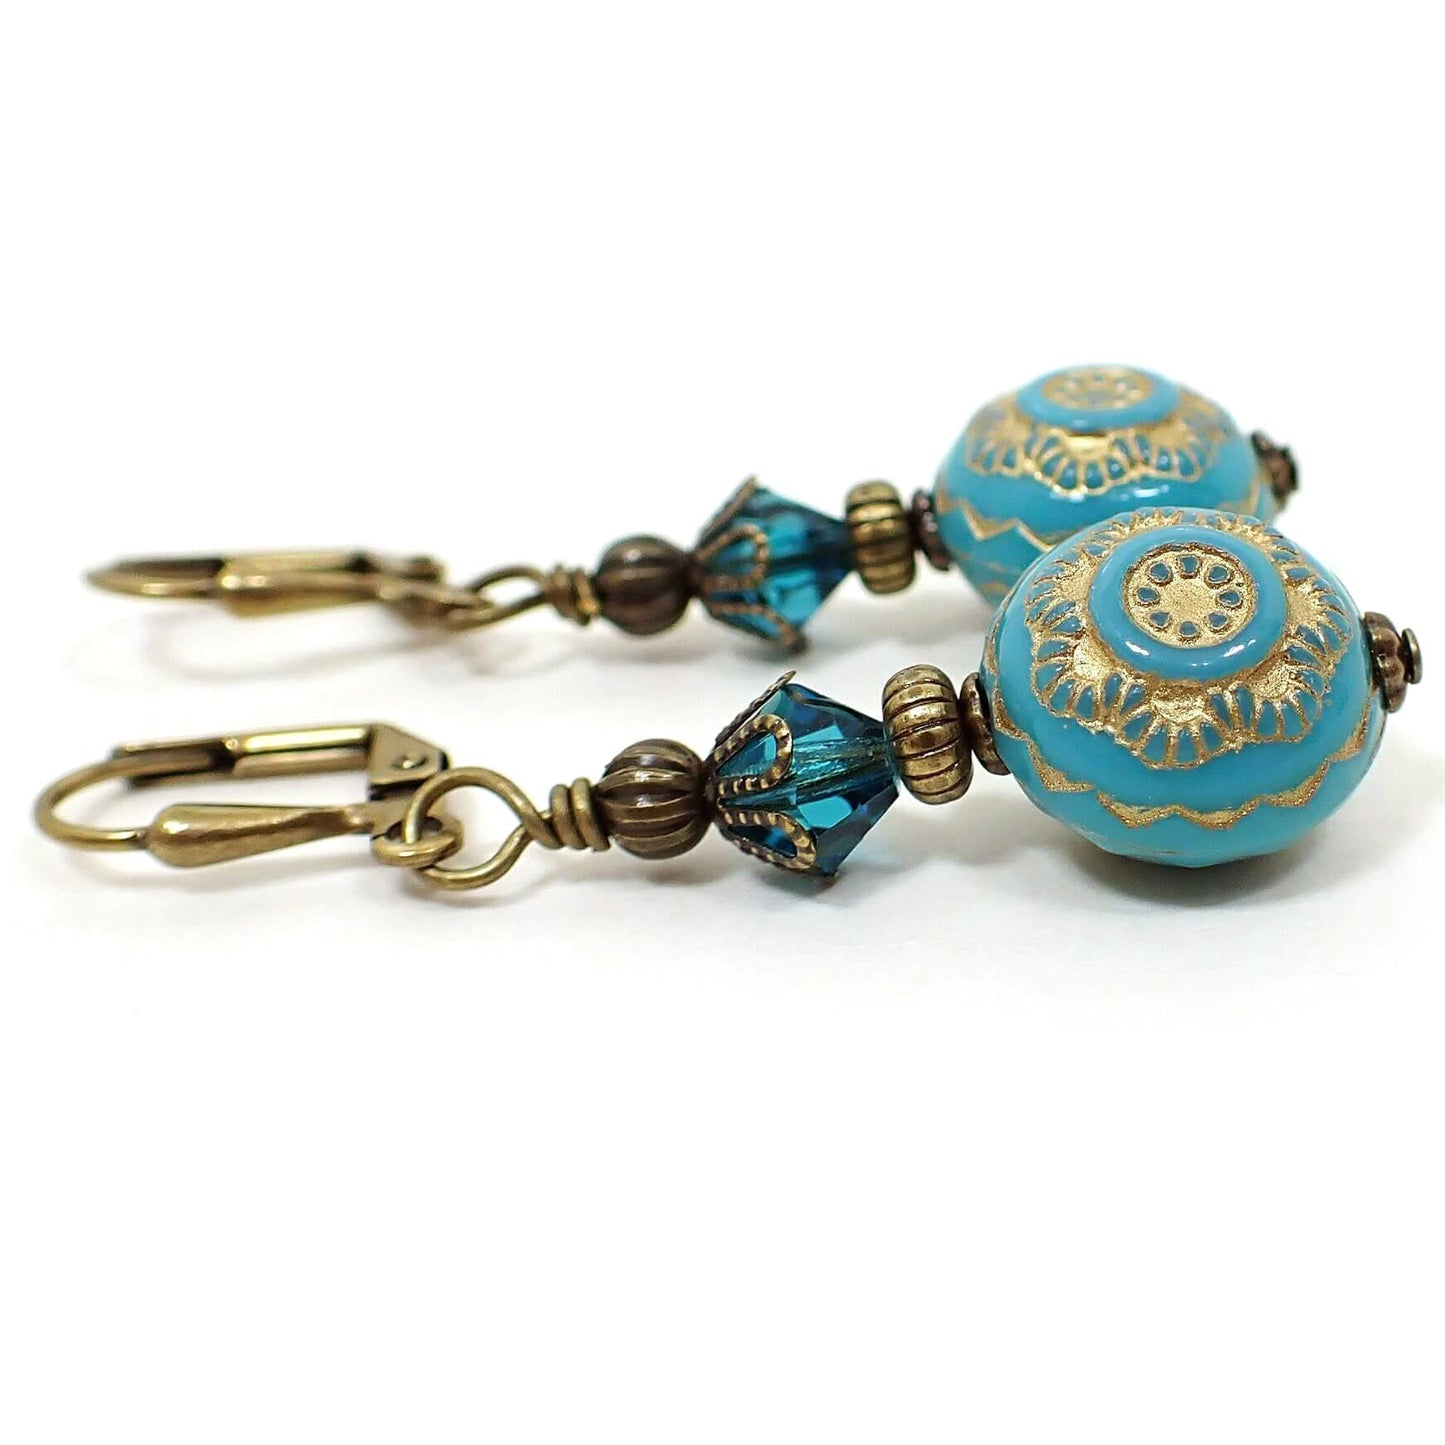 Side view of the handmade floral drop earrings. The metal is antiqued brass in color. There are faceted glass crystal beads at the top in a teal blue color. The bottom beads are turquoise blue in color and have a metallic antiqued gold painted flower design on them.